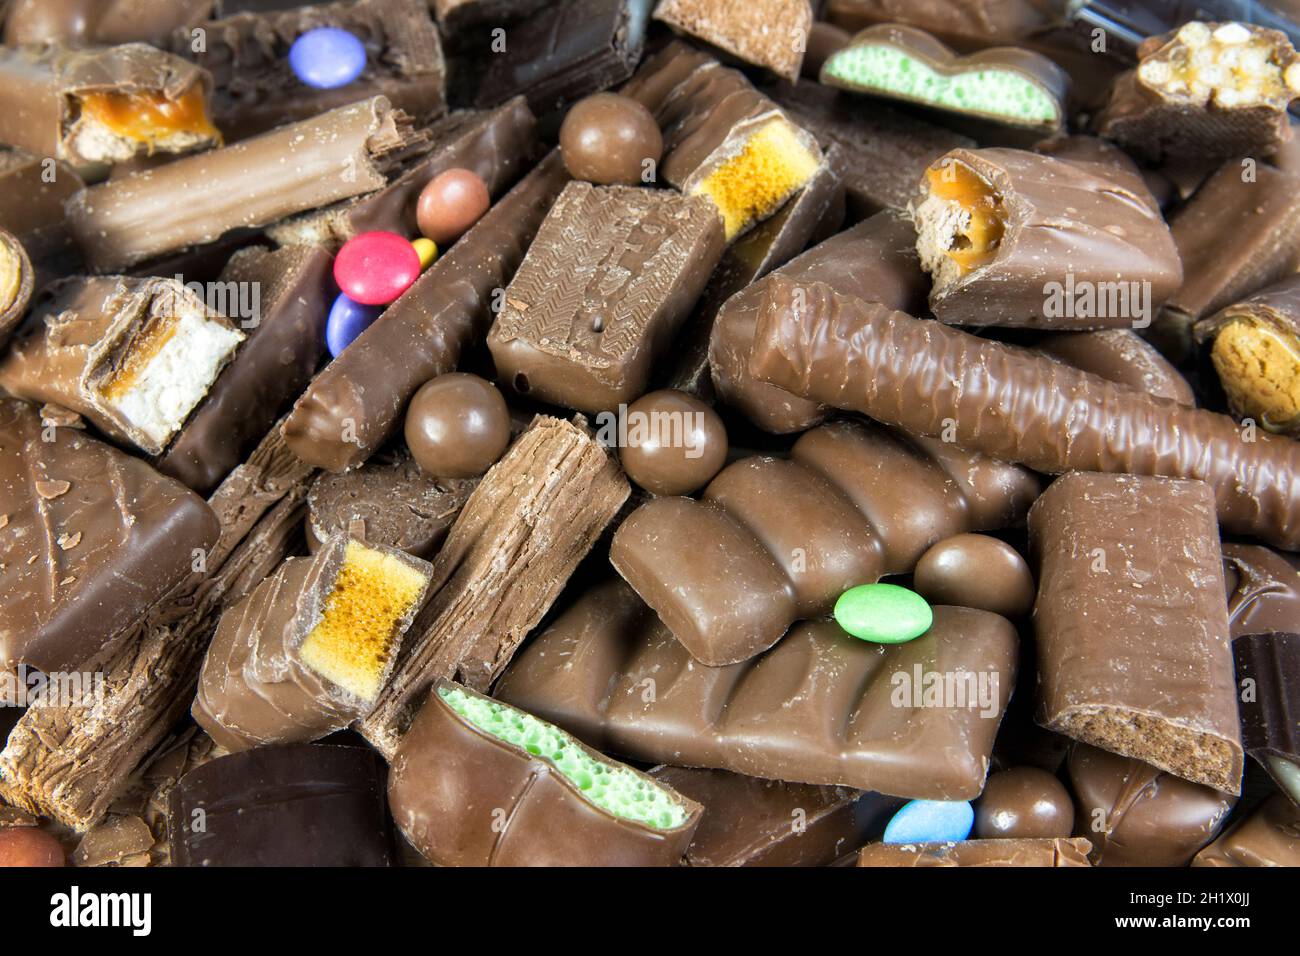 Full frame image of assorted everday Chocolate bars and snacks Stock Photo